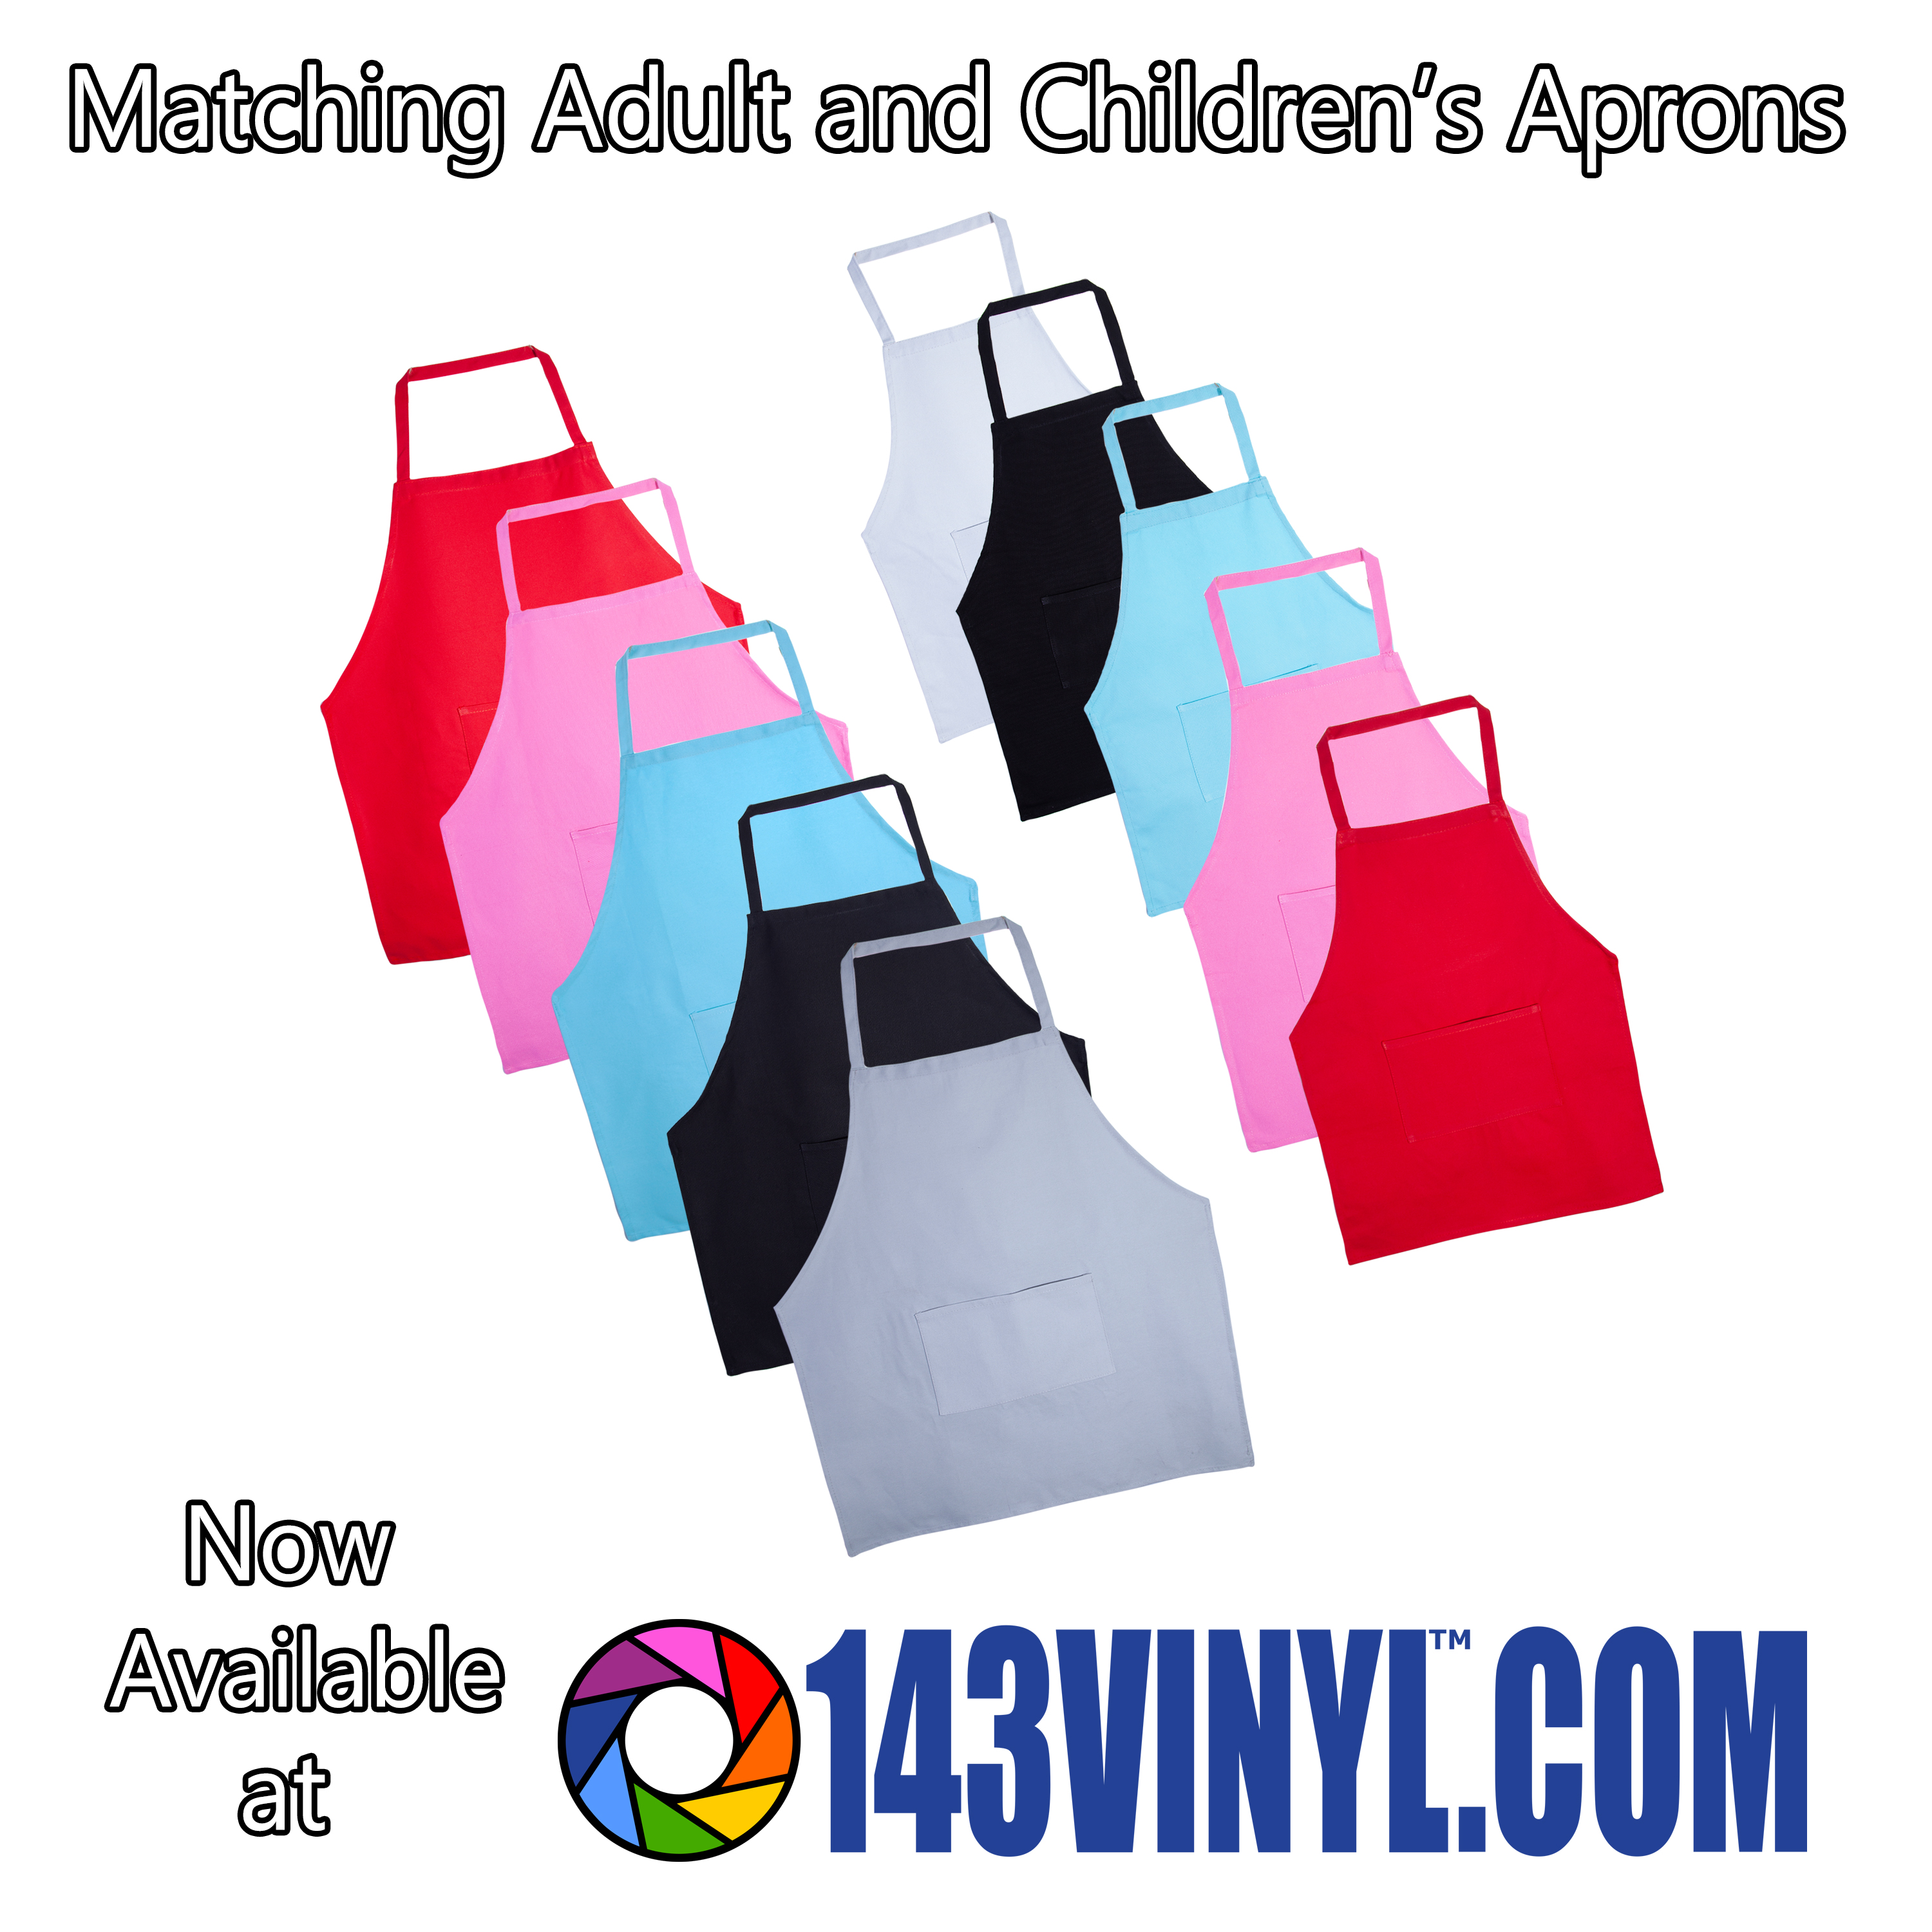 143VINYL Adds Aprons, Stockings, and Tree Skirts To Product Line 